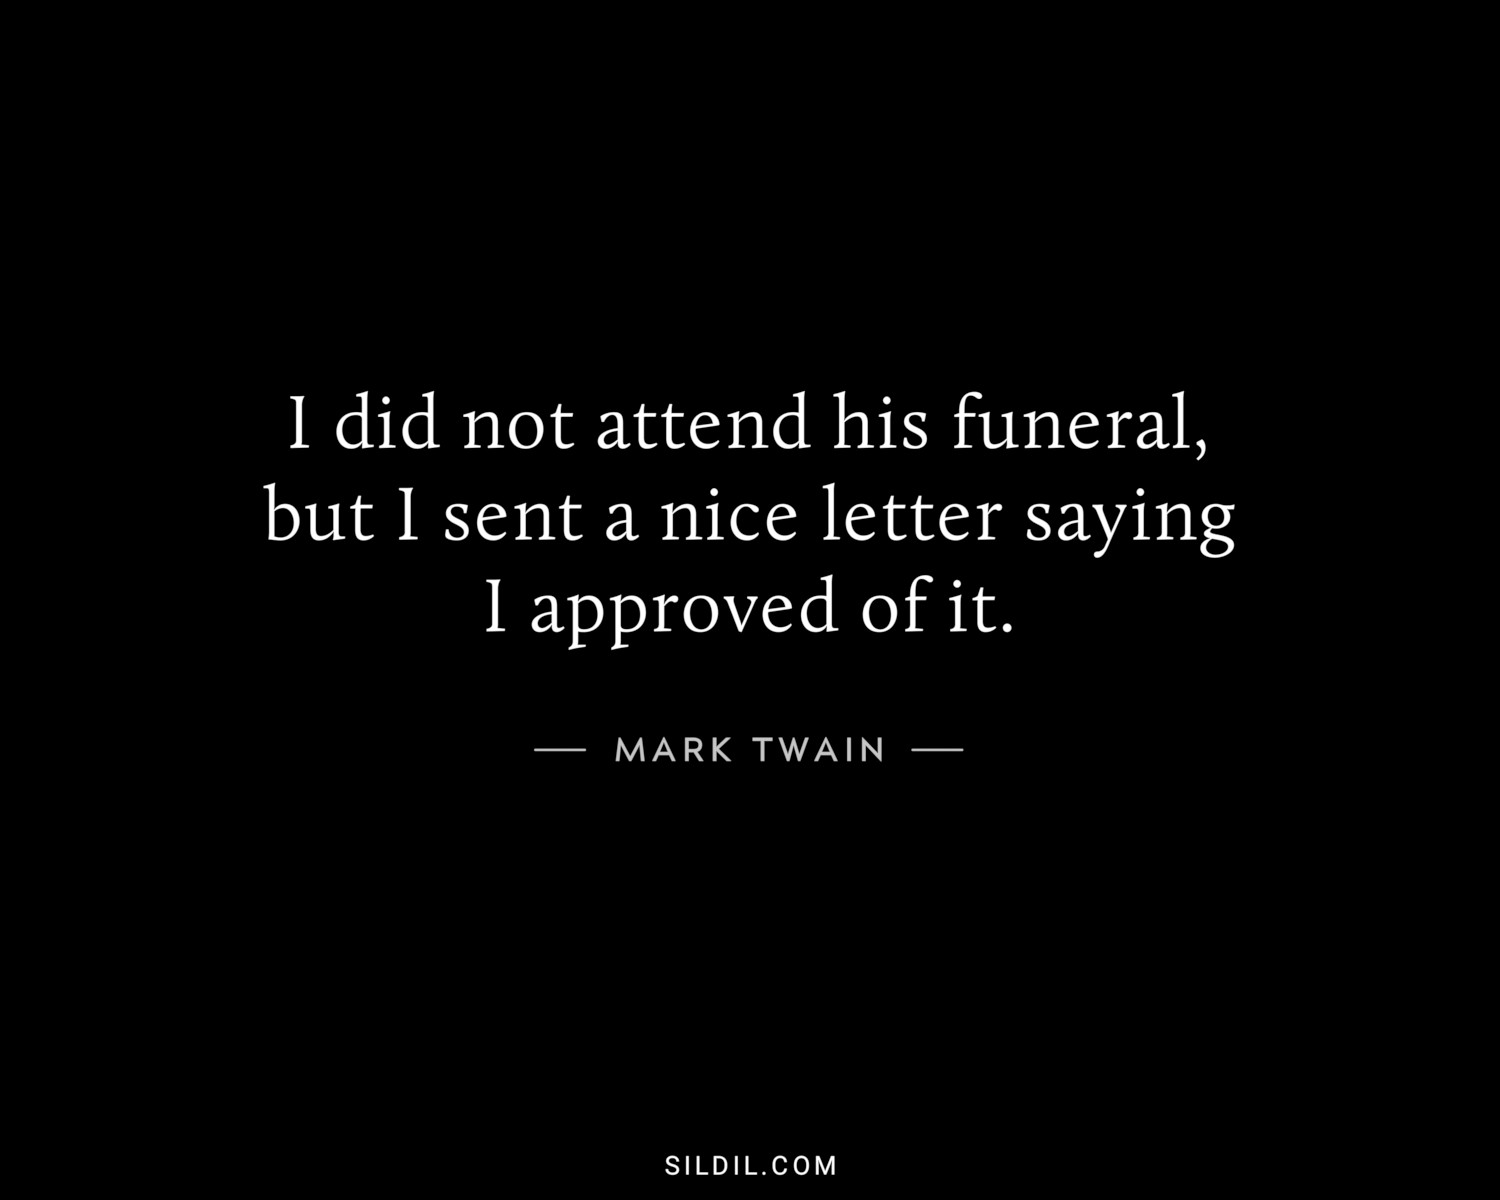 I did not attend his funeral, but I sent a nice letter saying I approved of it.